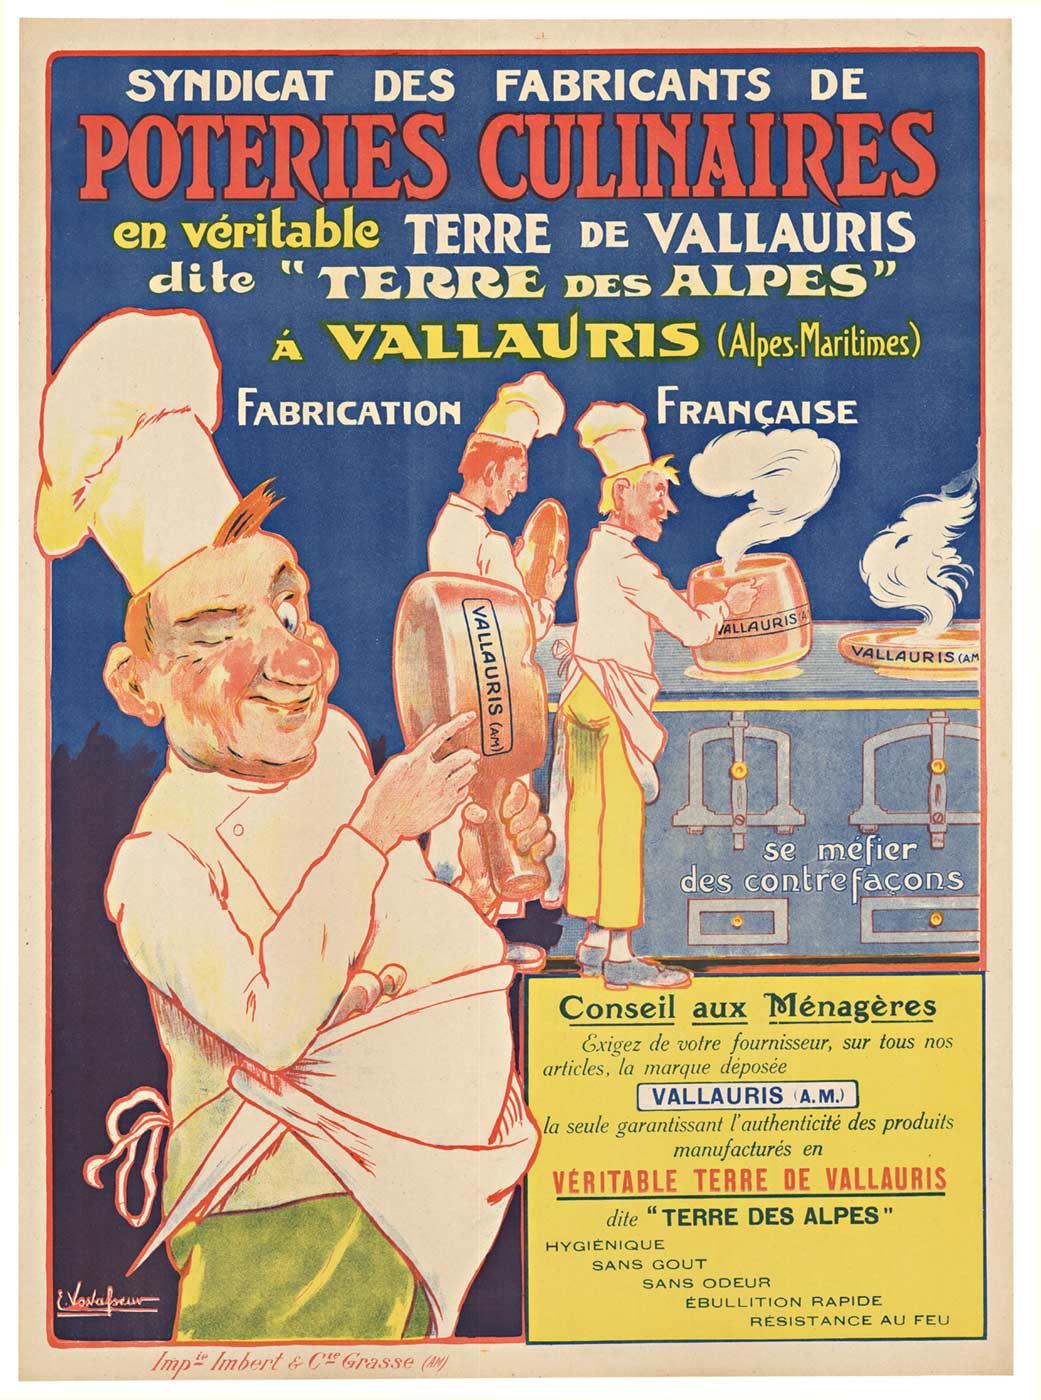 Original "Poteries Culinaires" vintage French cooking poster